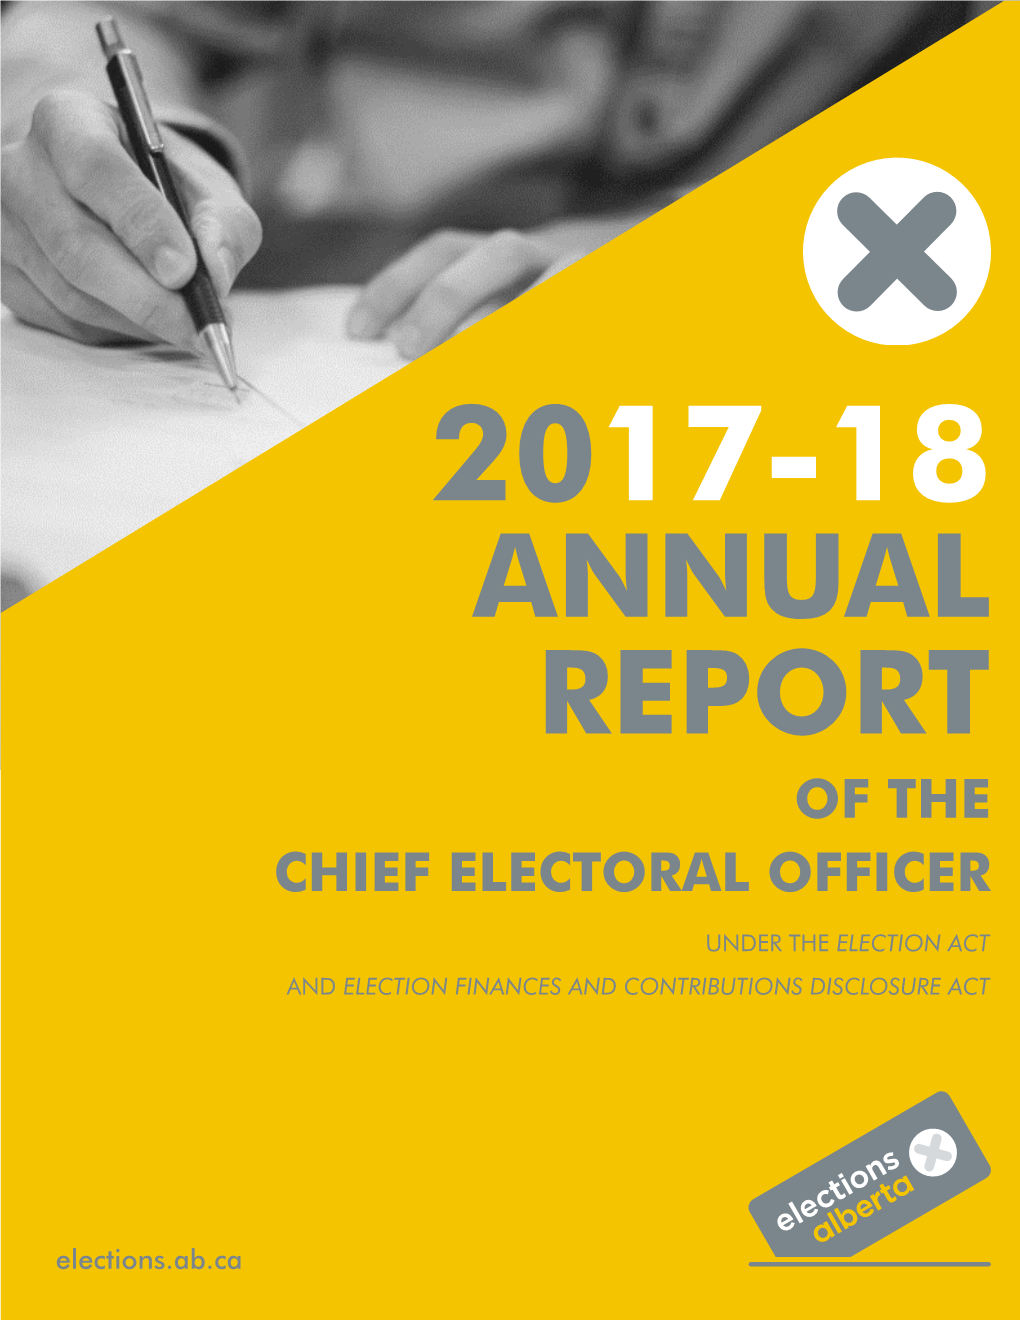 Of the Chief Electoral Officer